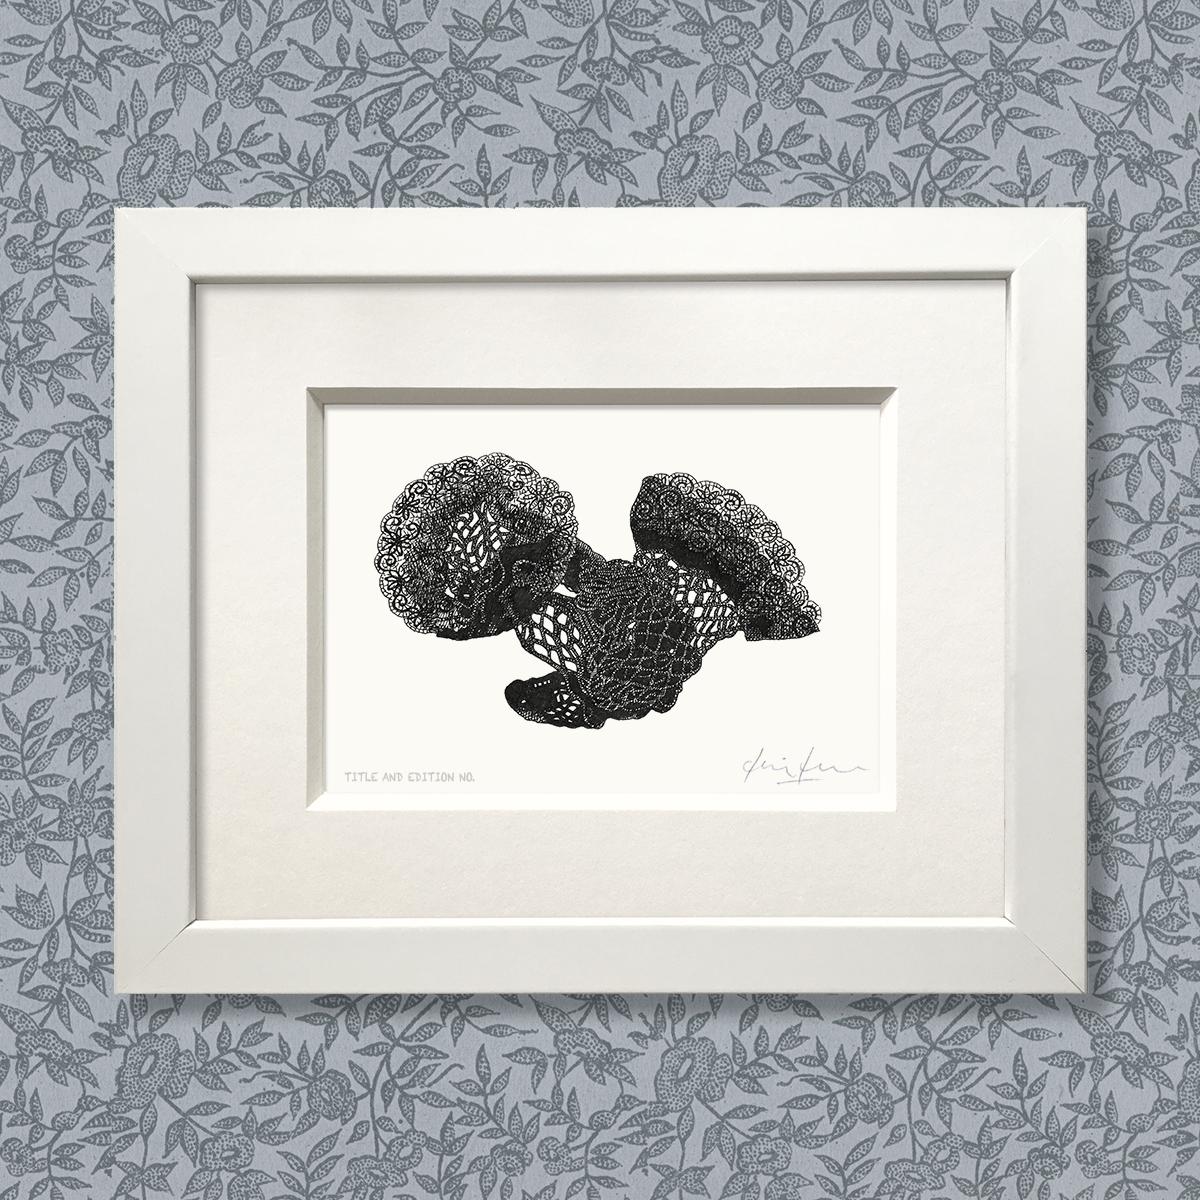 Limited edition print from pen and ink drawing of a pair of discarded fishnet stockings in a white frame